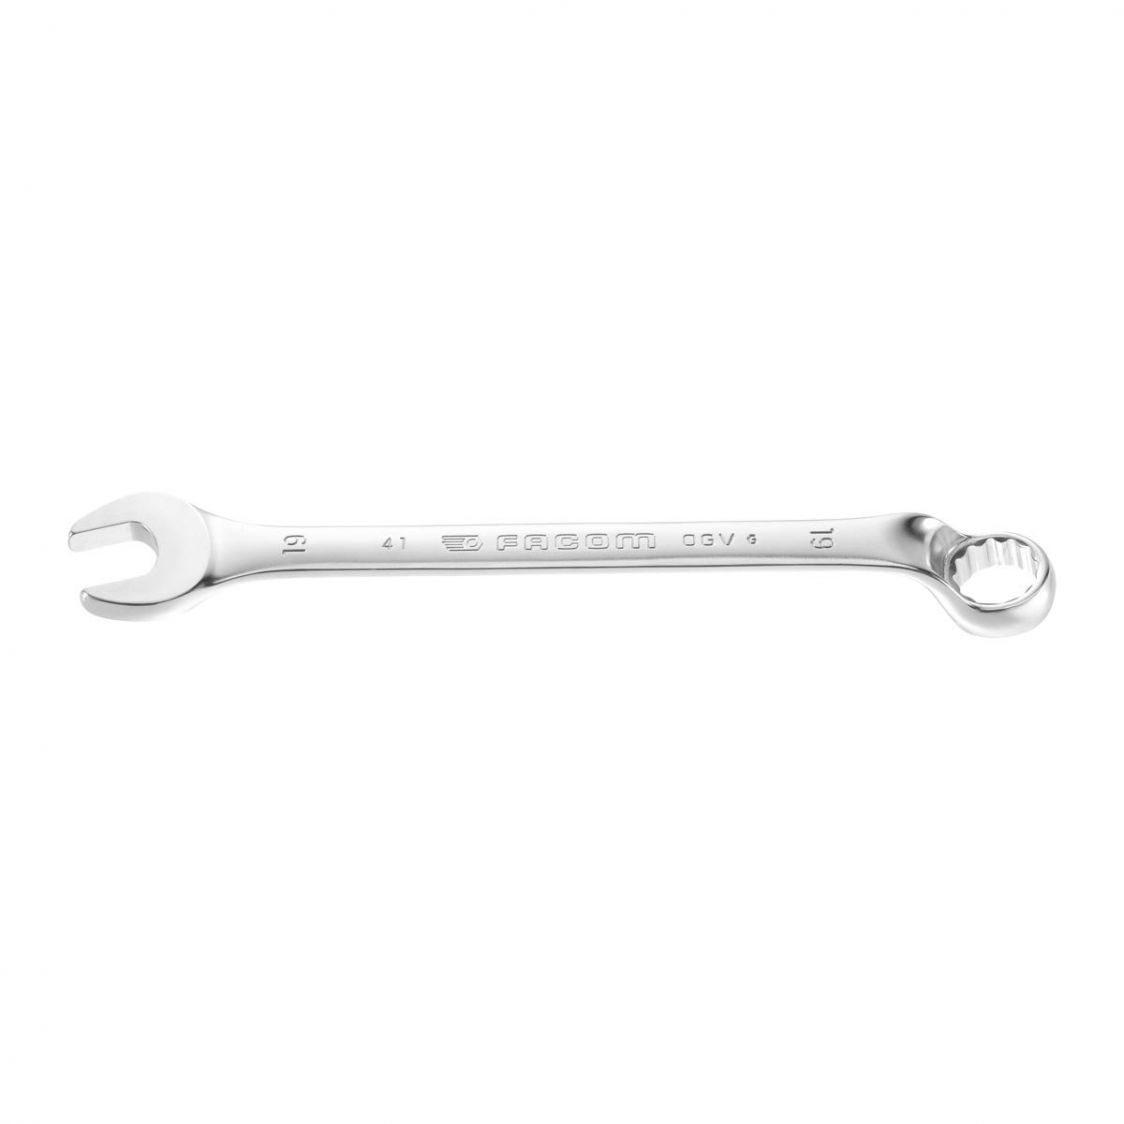 FACOM 41.24 - 24mm Metric Offset Combination Spanner